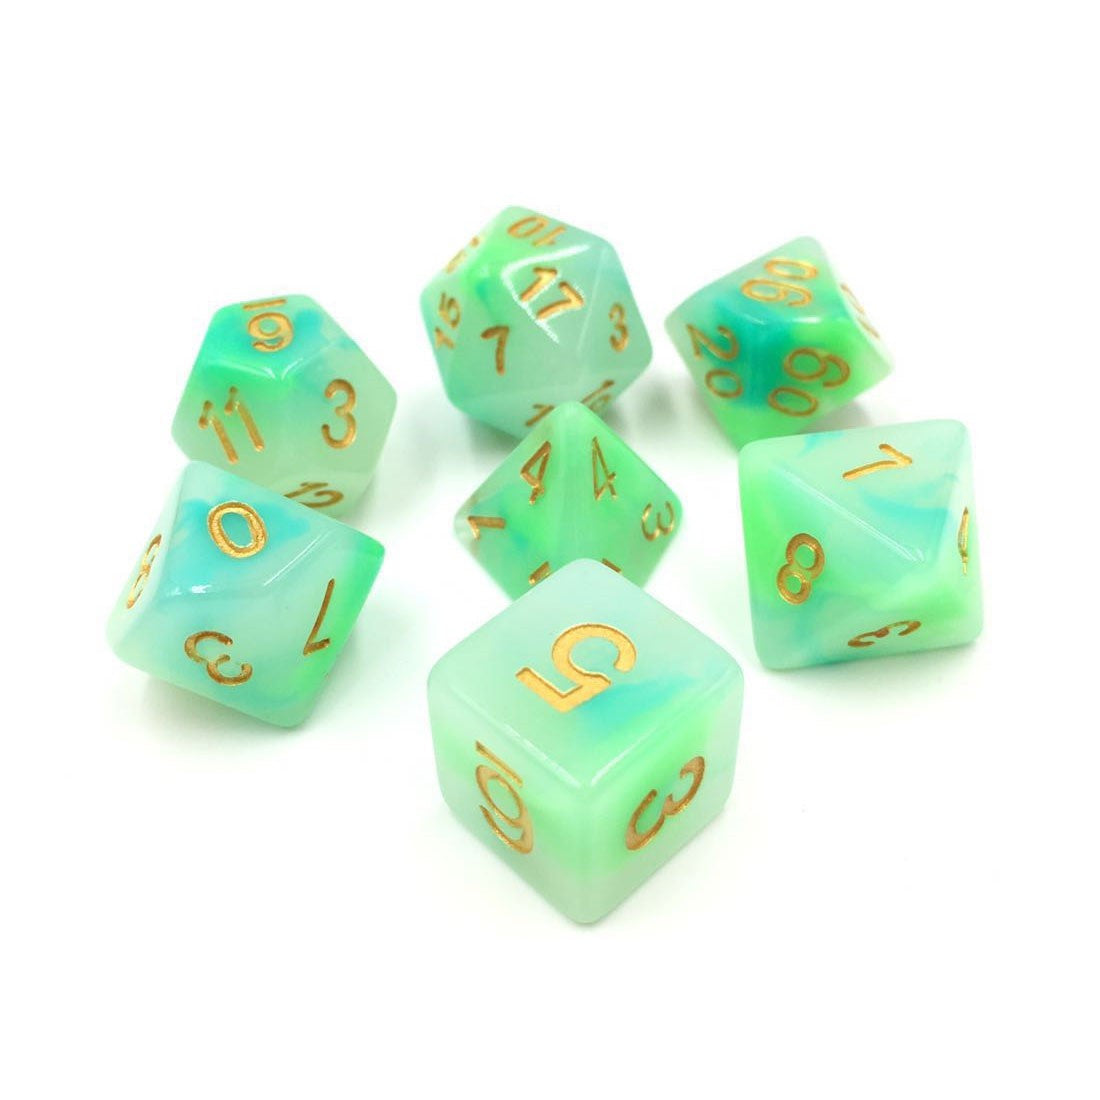 Blue and Green Opalescent Jade Polyhedral Dice Set